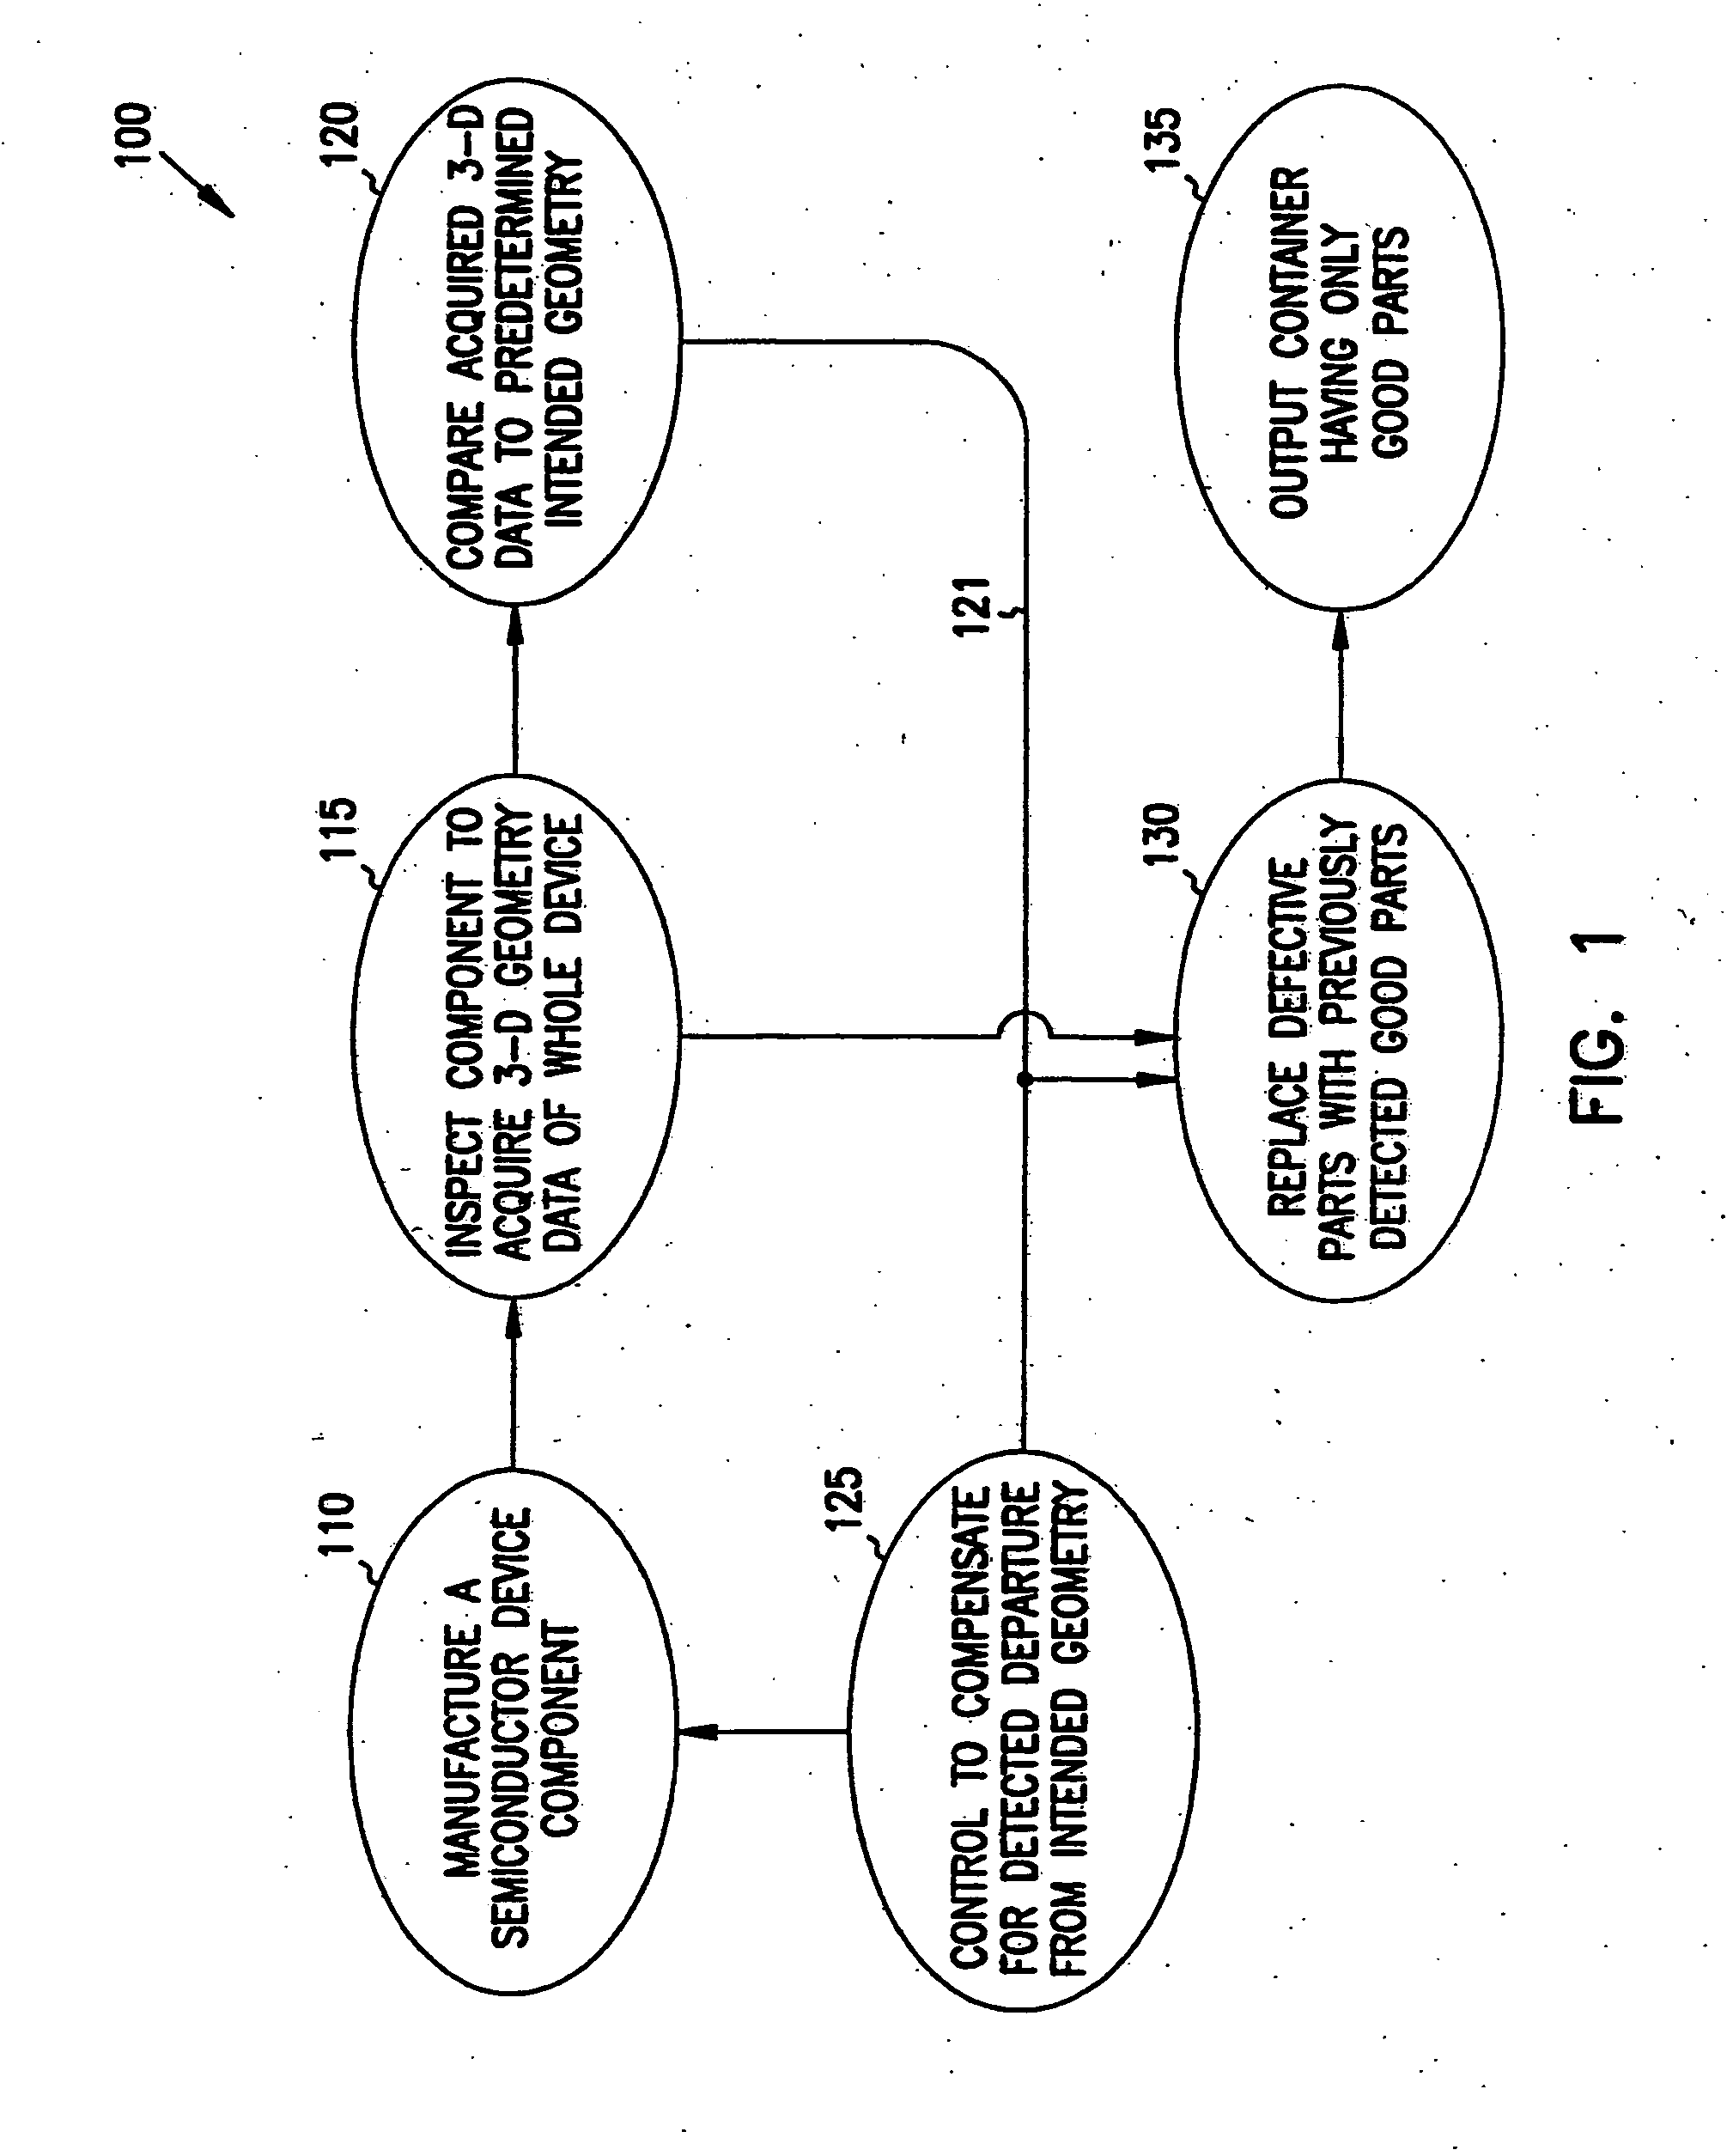 Parts manipulation and inspection system and method